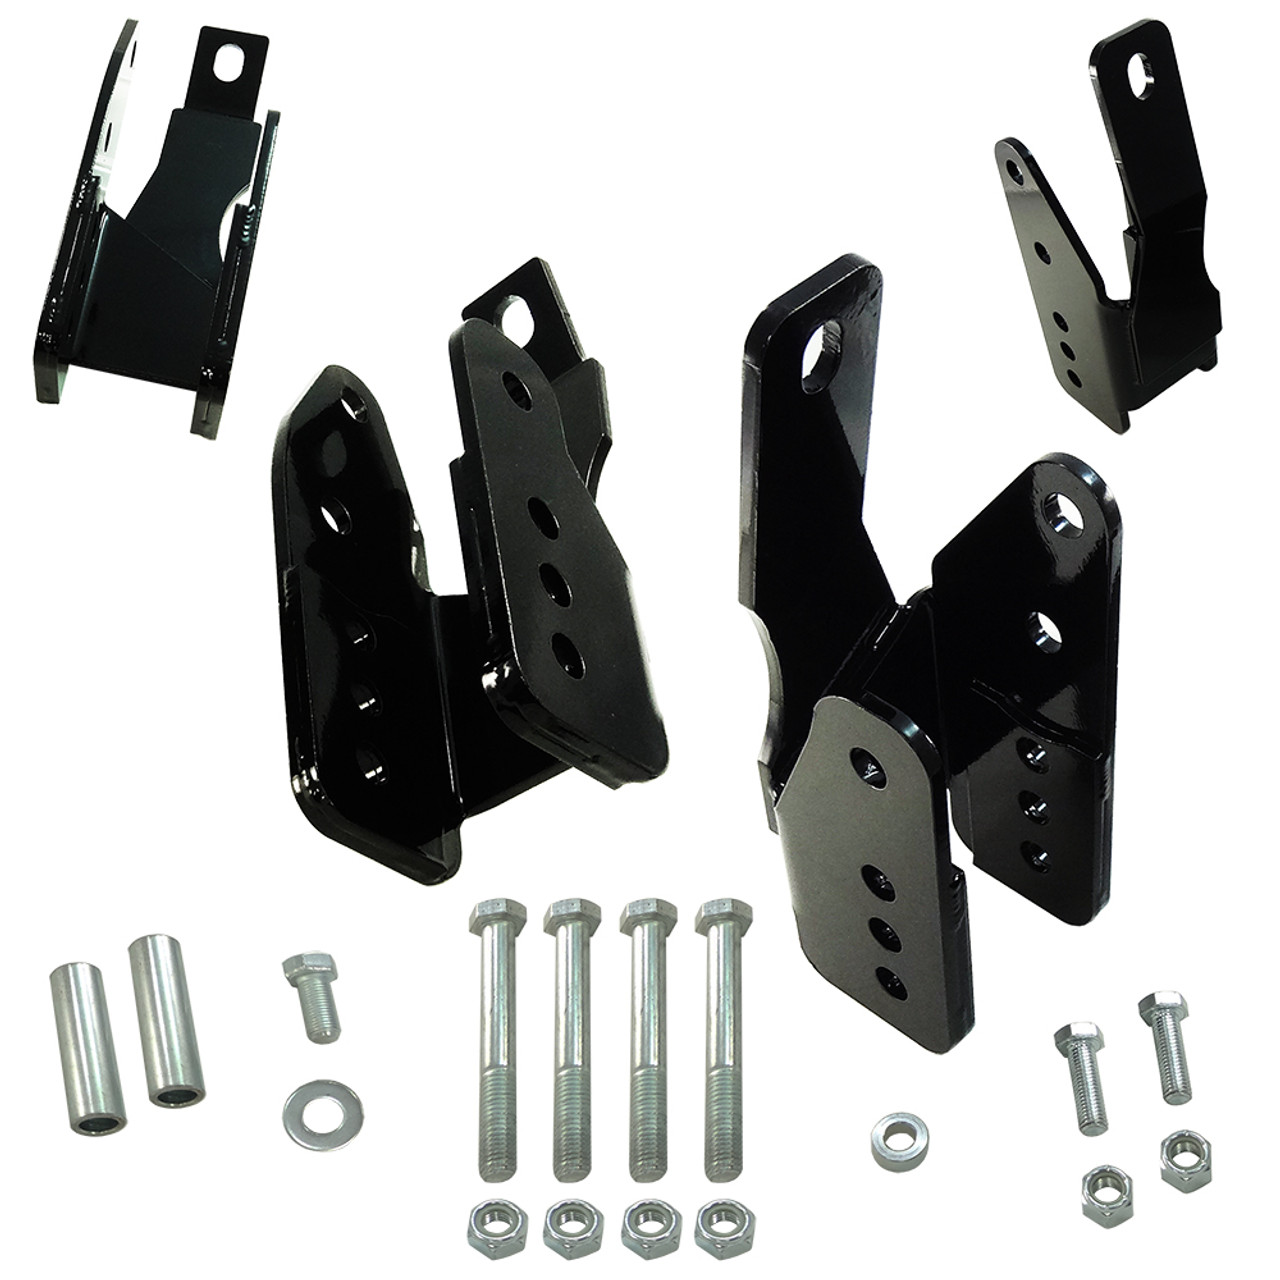 05-14 Mustang Lower Control Arm Relocation Bracket Kit